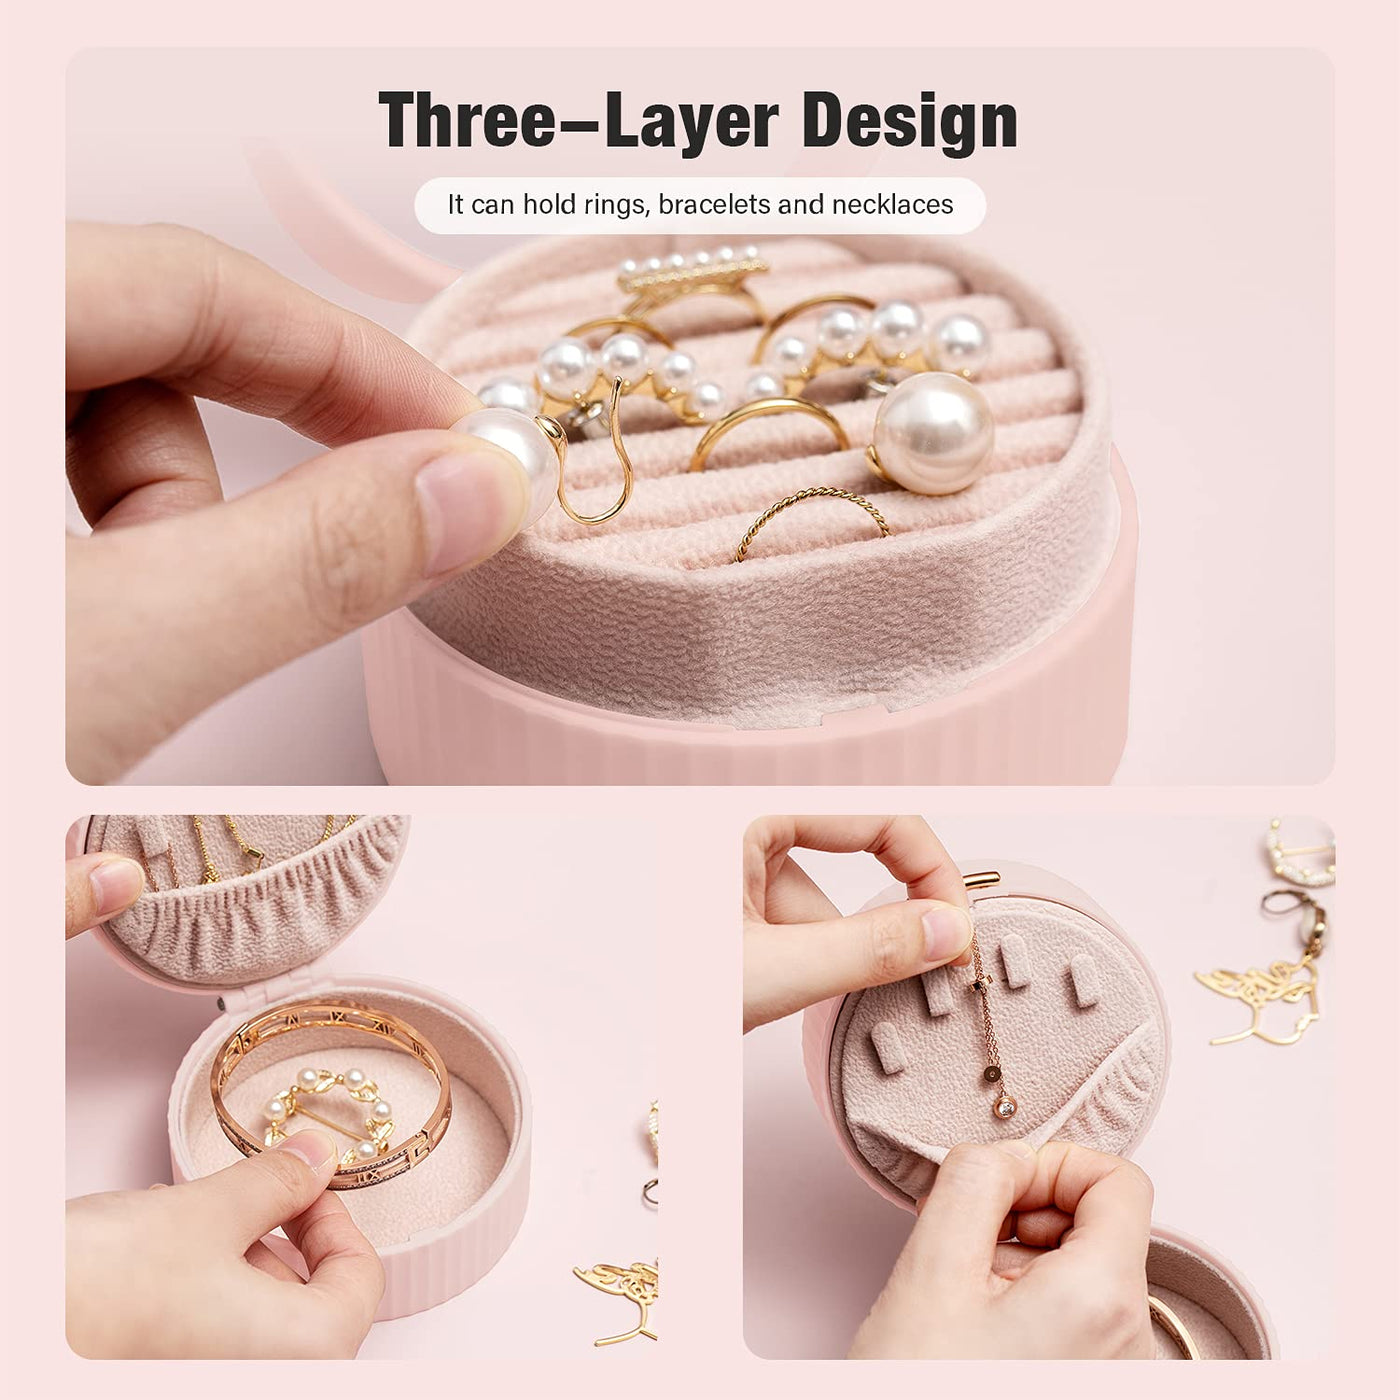 Jewelry Box for Women, Portable Double-Layer Jewelry Storage Box, Earrings,  Rings, Necklaces, Bracelets, PU Leather Compact Portable Jewelry Suitcase,  Pink Jewelry Box 